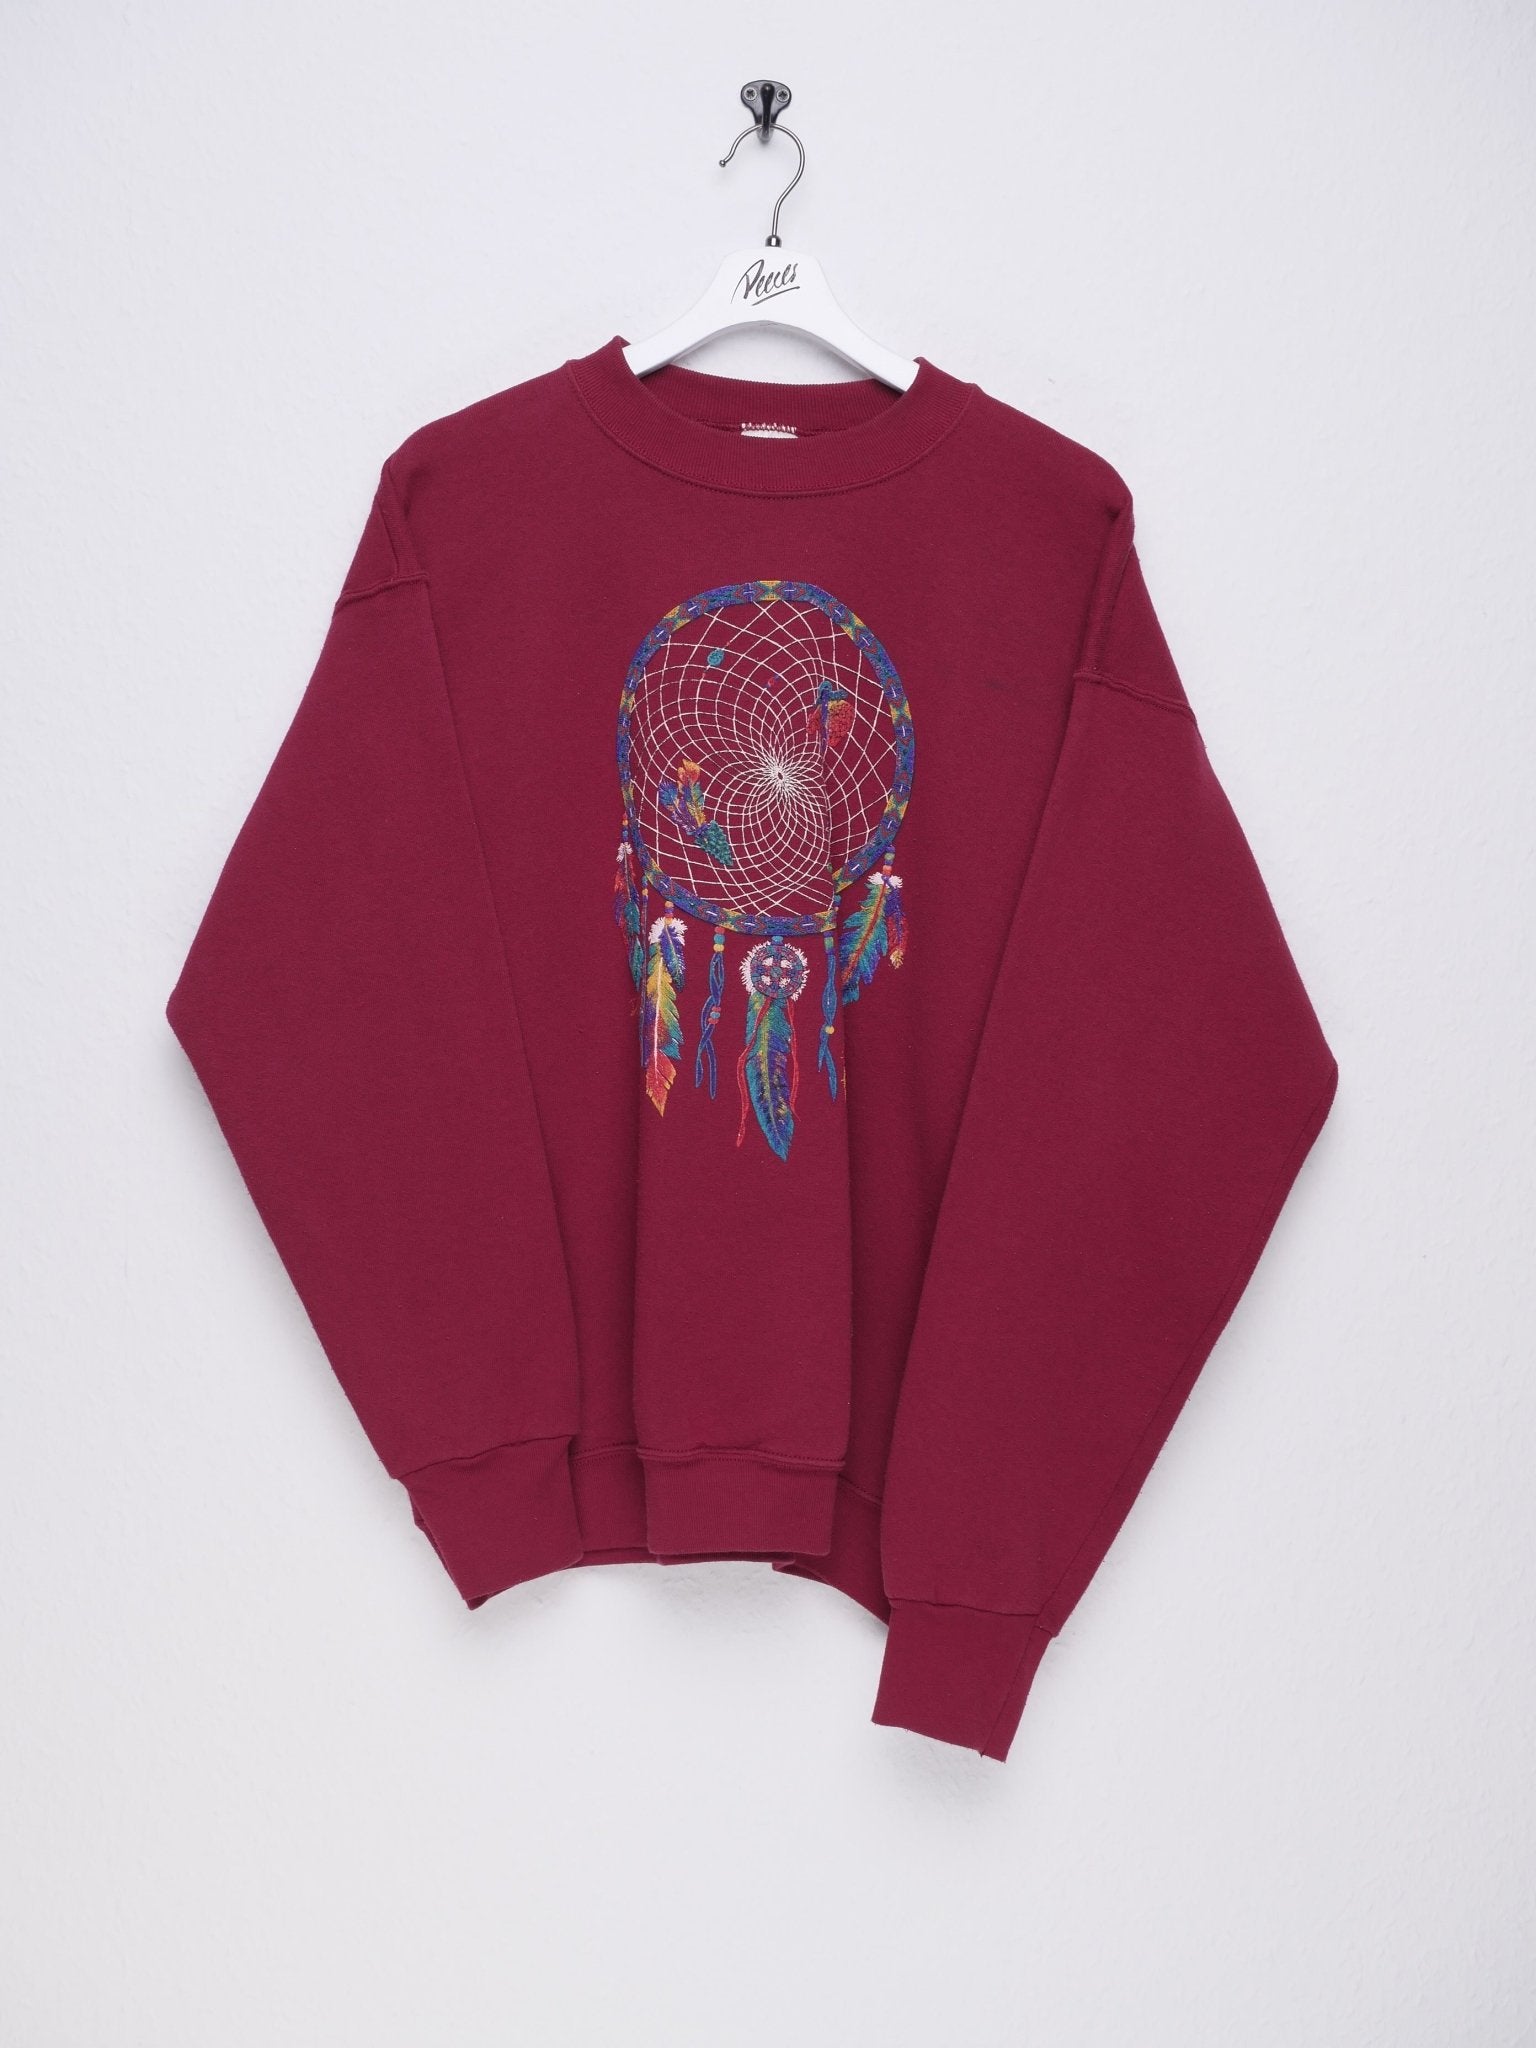 fruit 'Dreamcatcher' printed Graphic red Sweater - Peeces